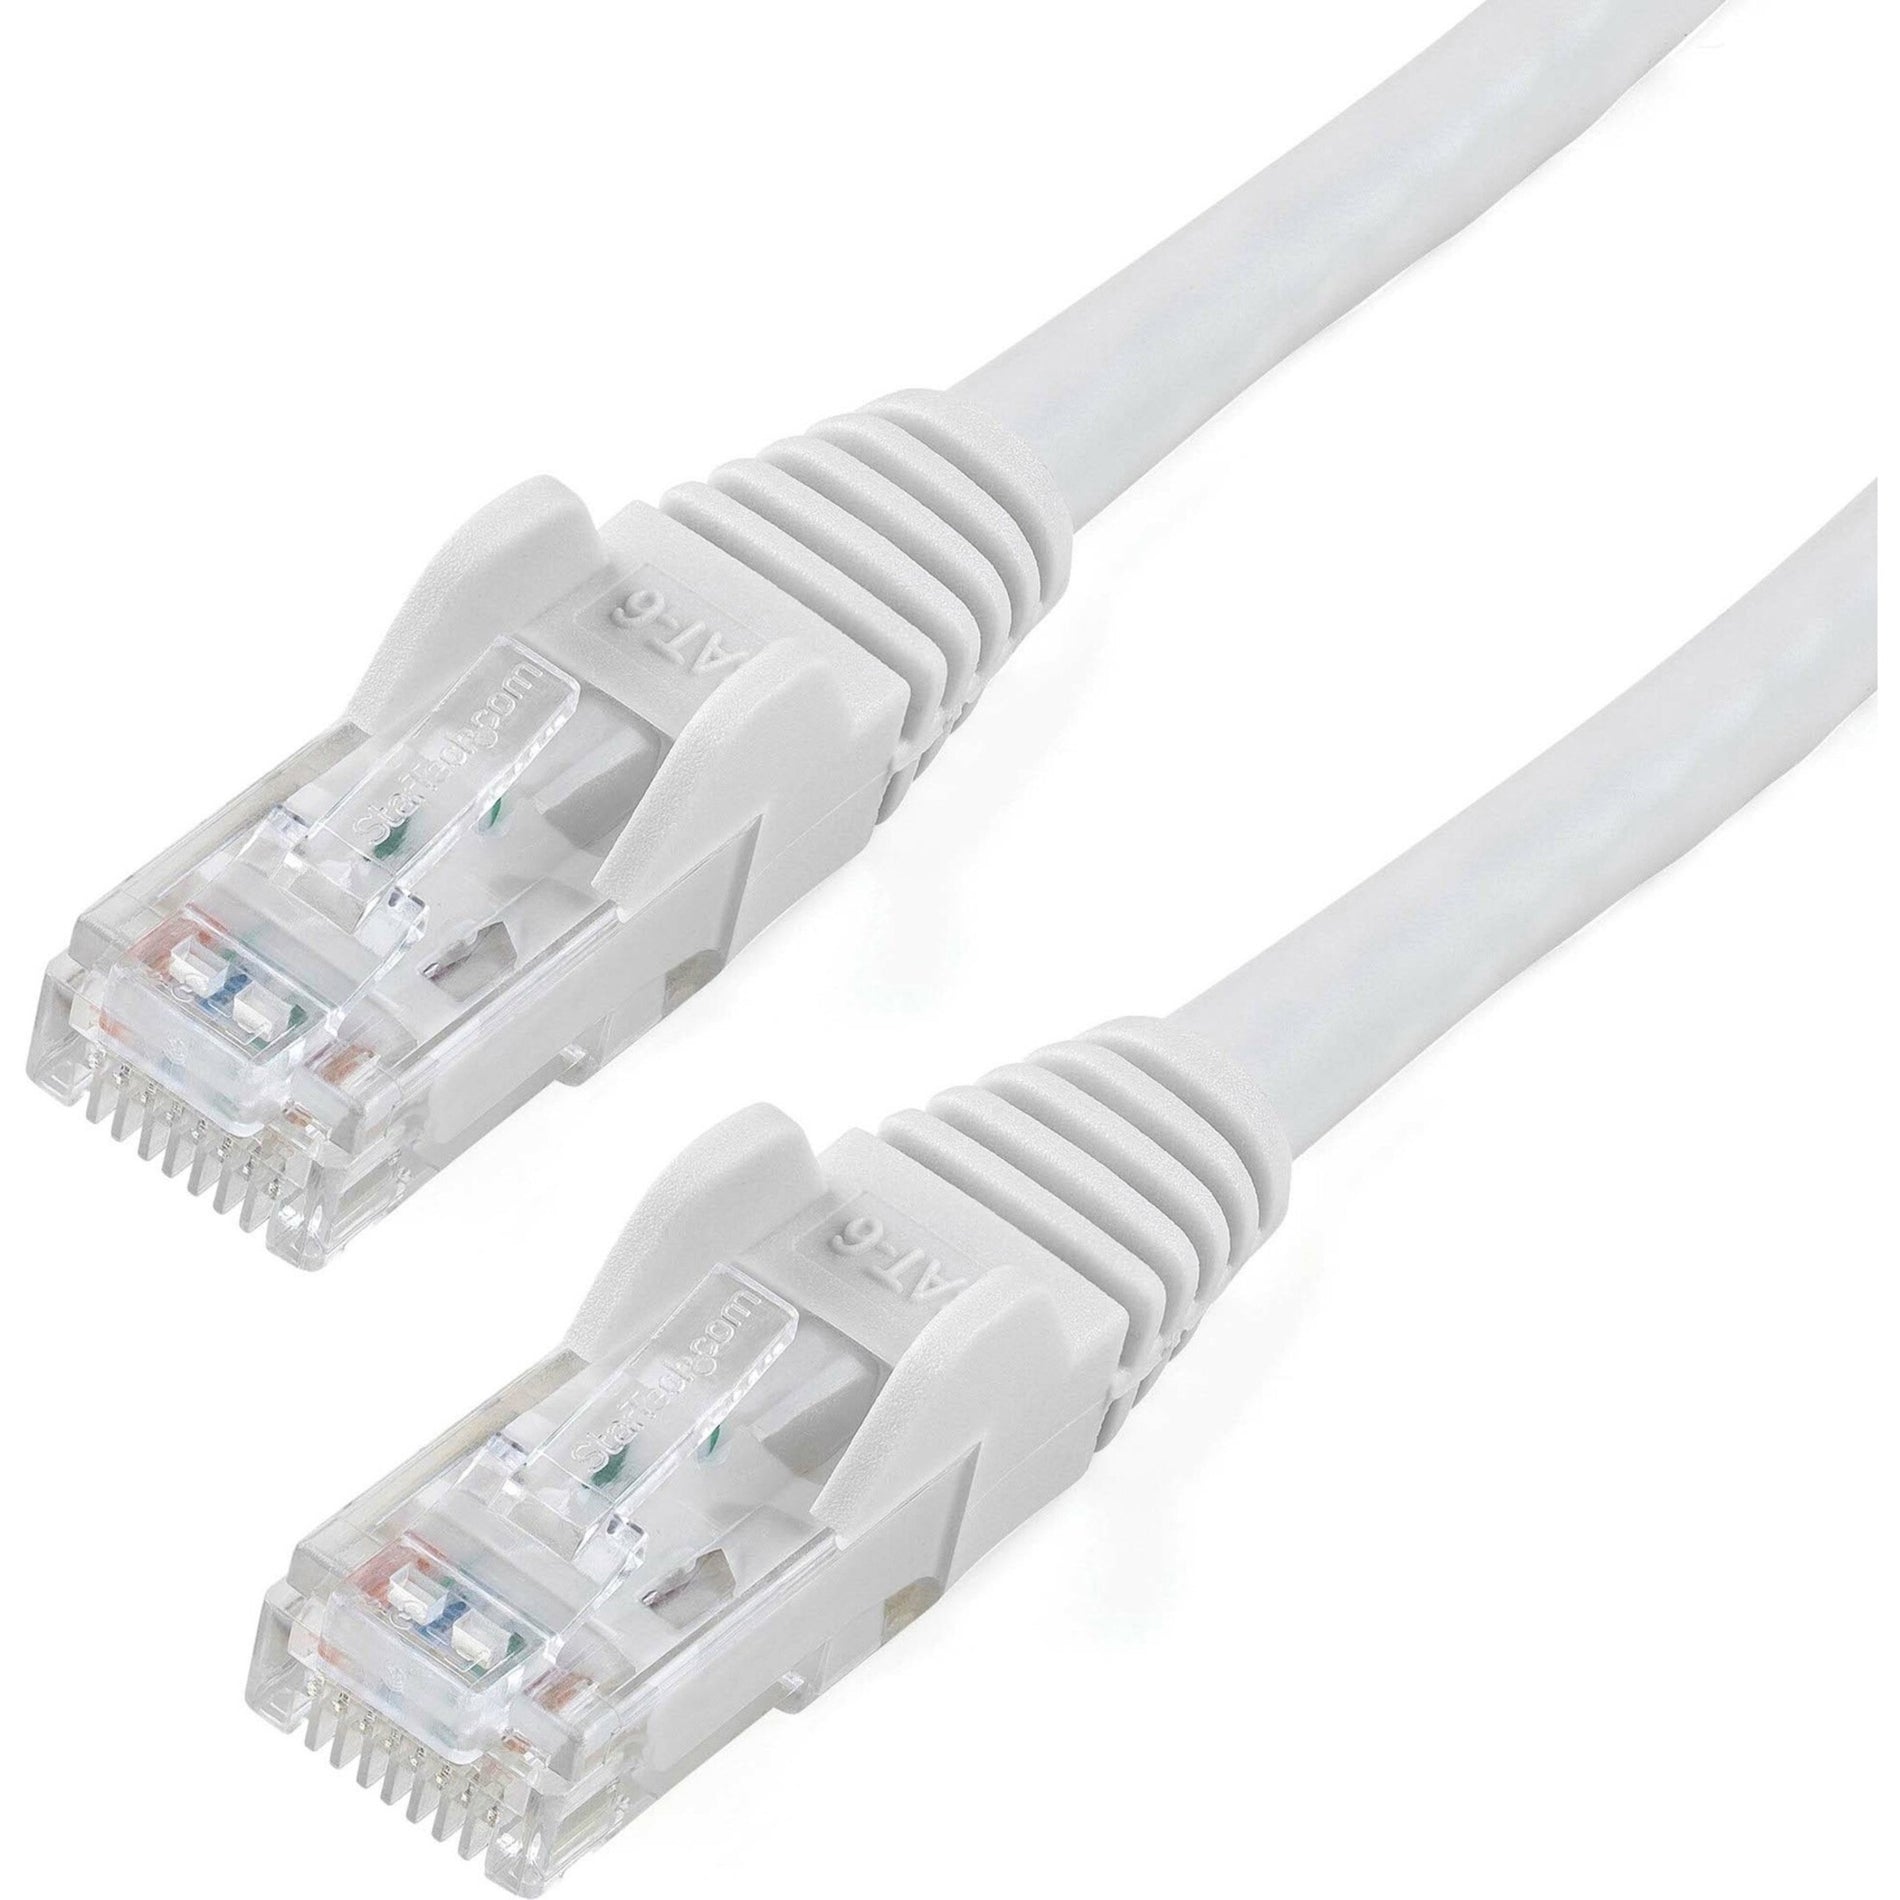 StarTech.com N6PATCH14WH Cat6 Patch Cable, 14ft White Ethernet Cable, Snagless RJ45 Connectors